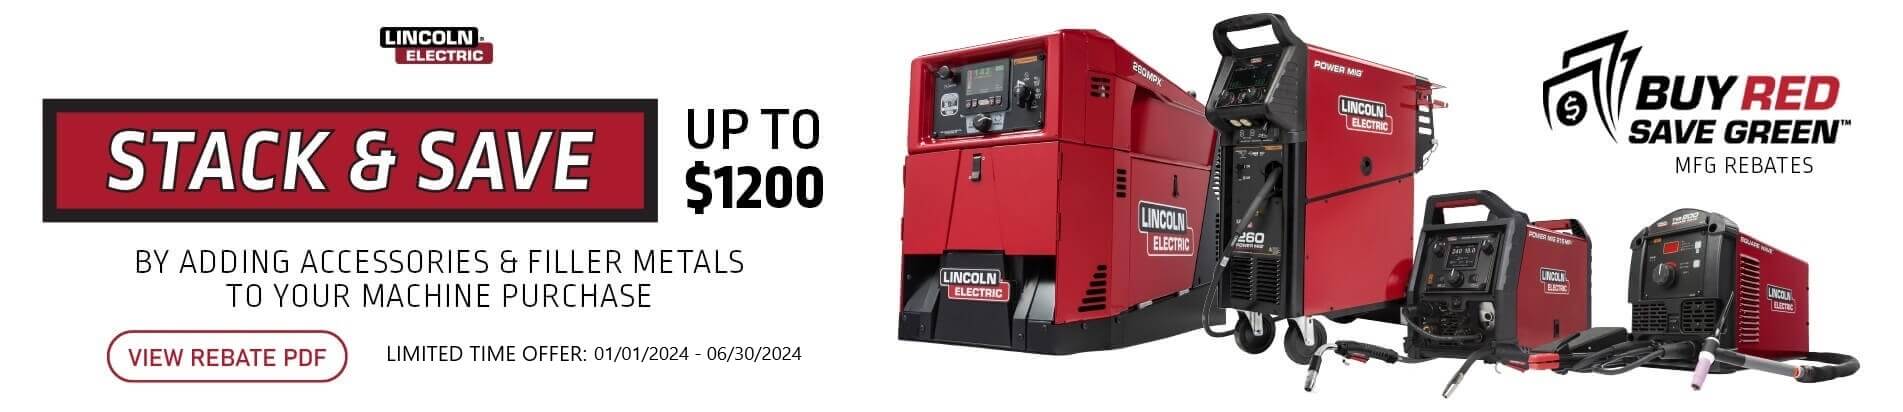 Lincoln Electric buy red save green welding discounts 2024